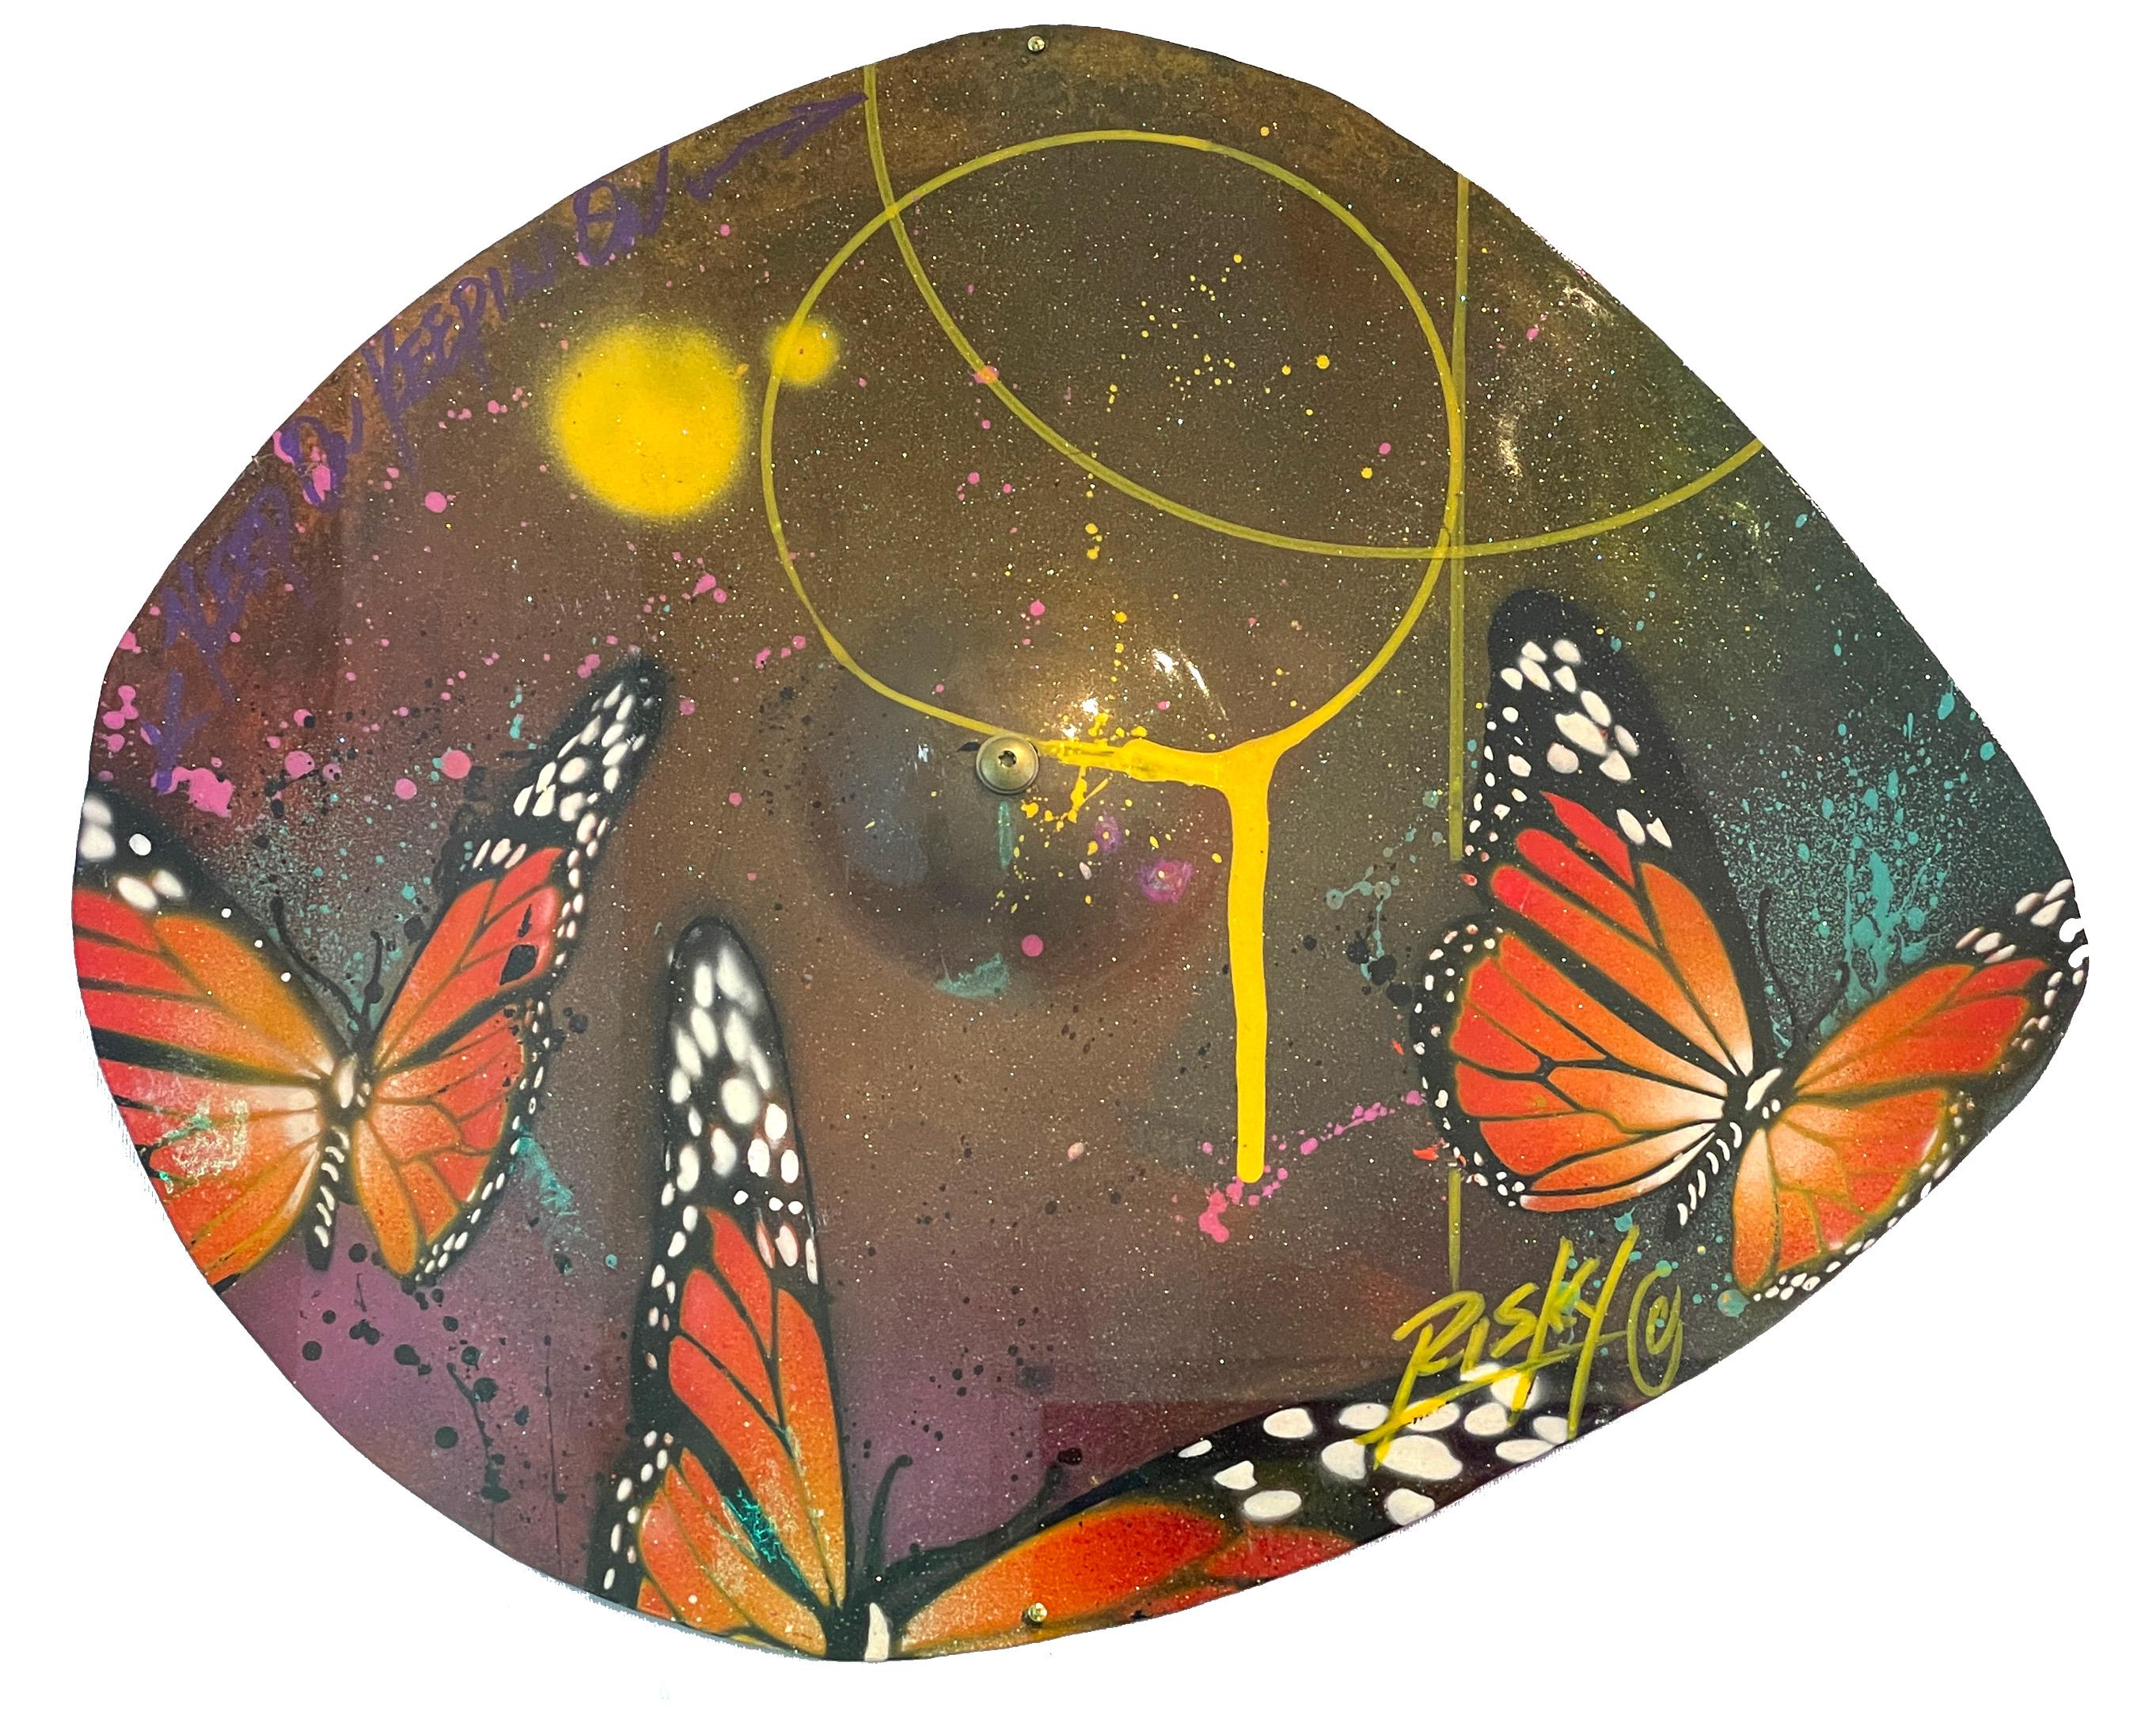 Cymbal with Butterflies - Mixed Media Art by RISK